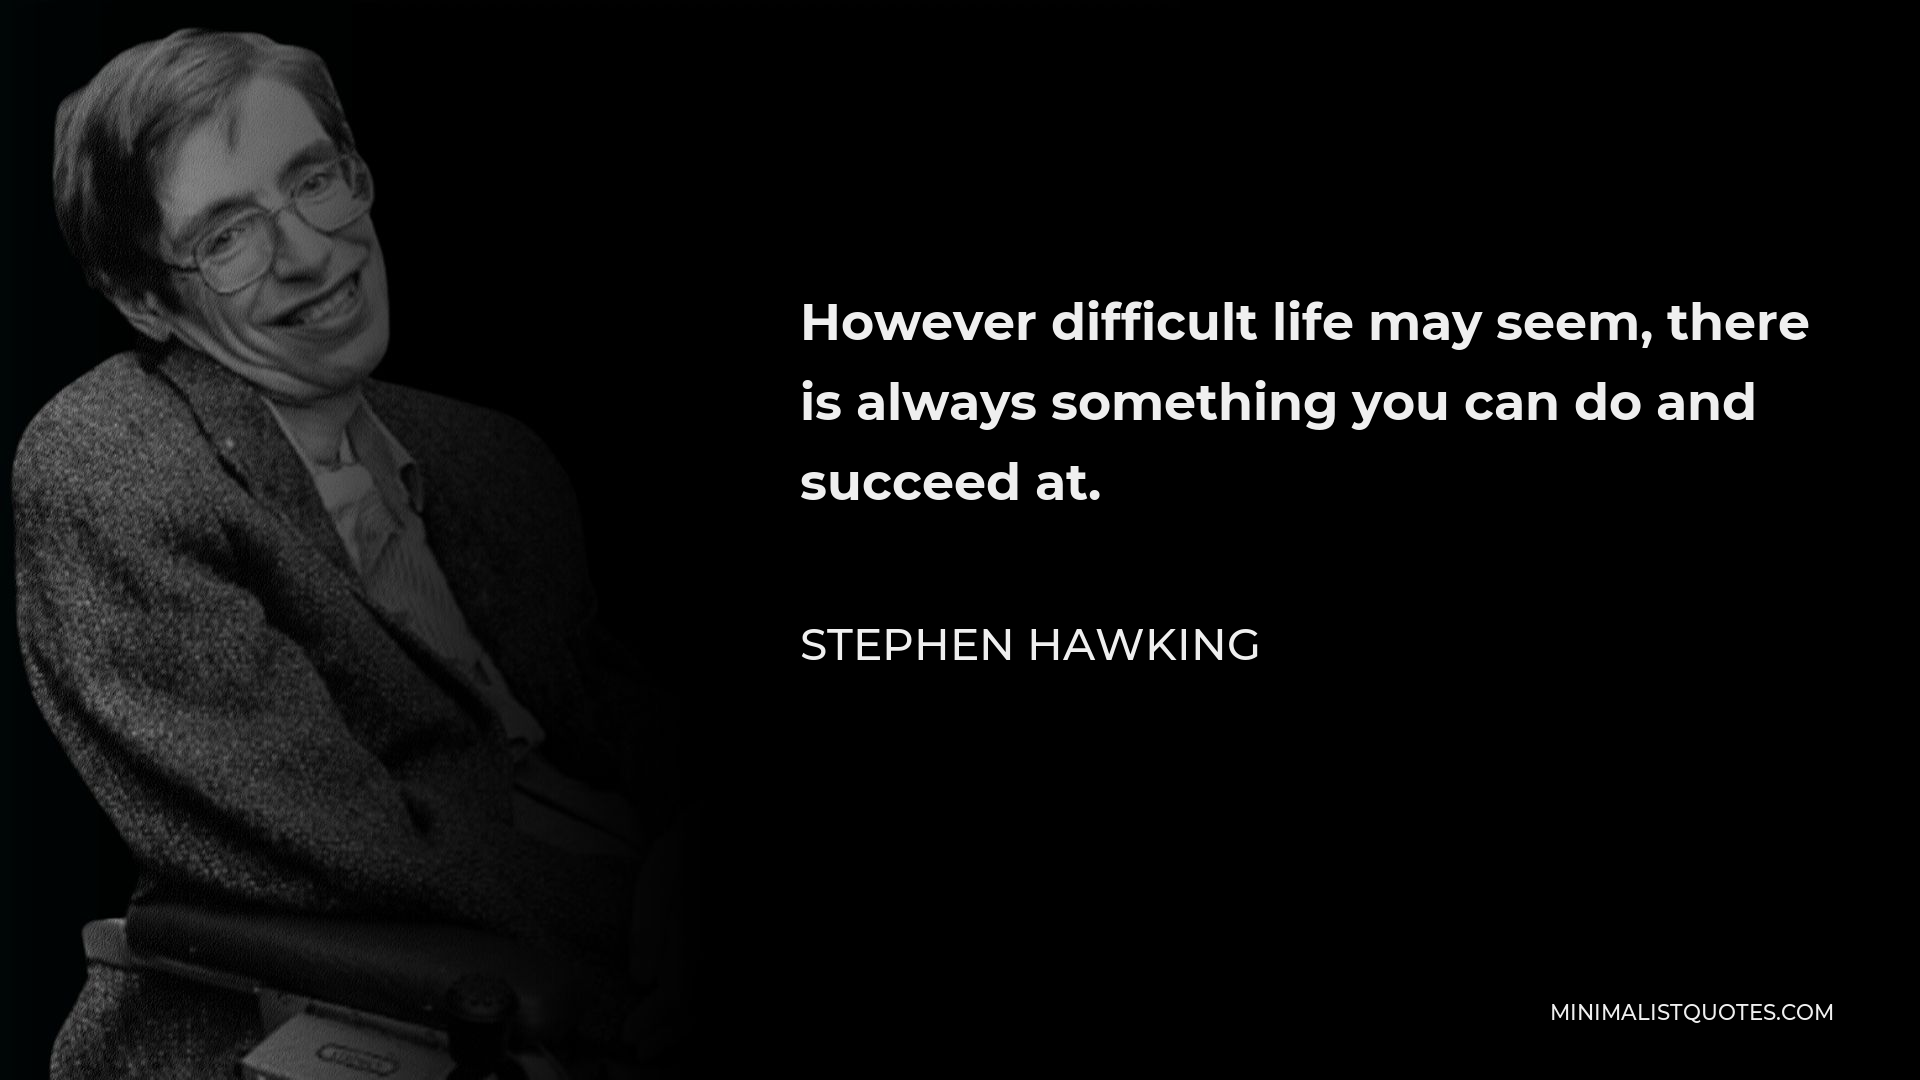 Stephen Hawking Quote - However difficult life may seem, there is always something you can do and succeed at.